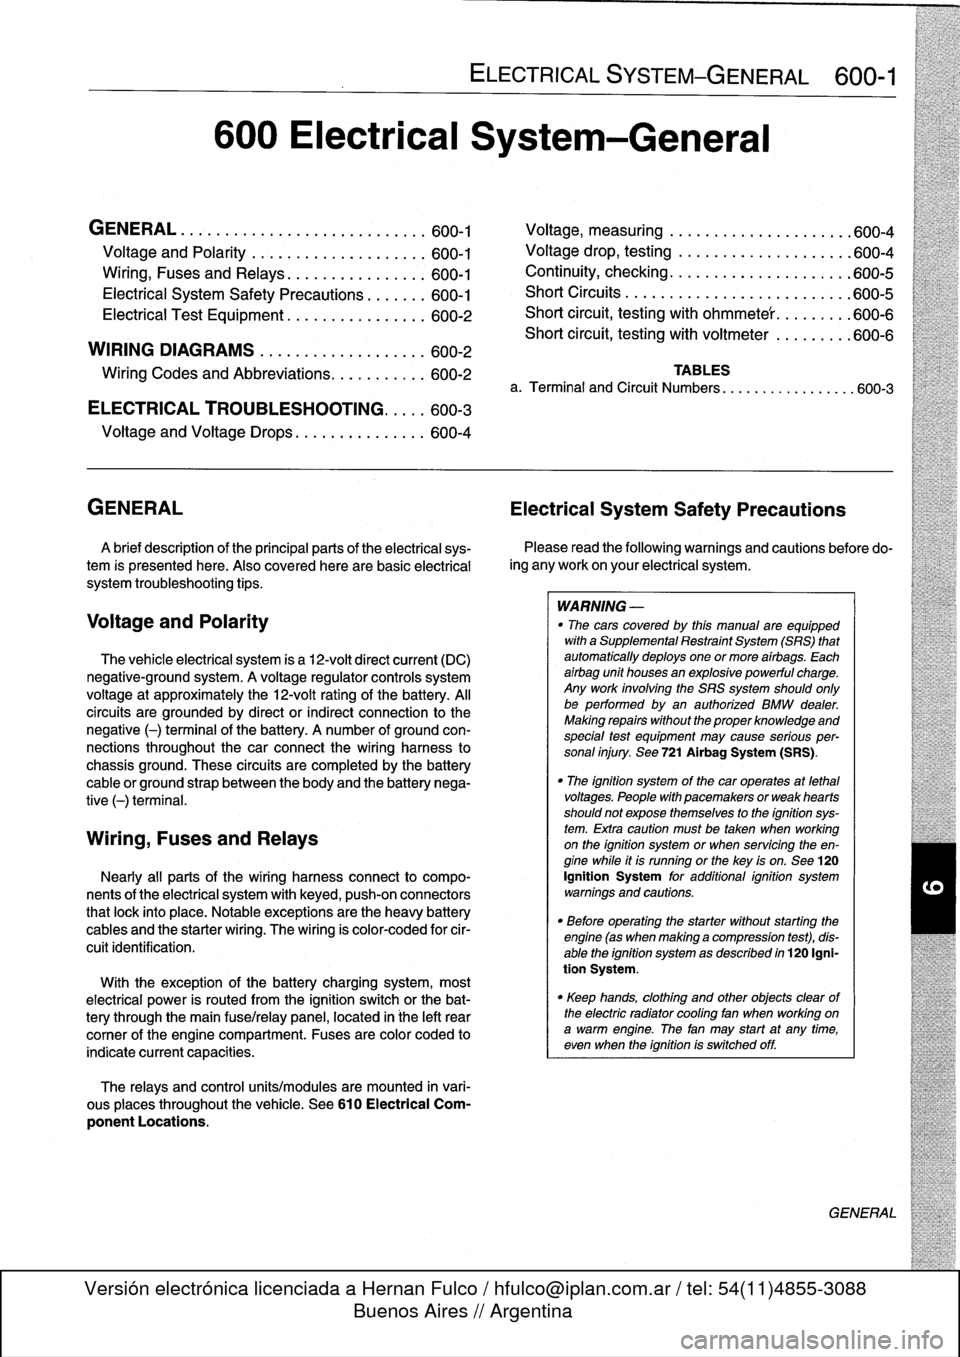 BMW 318i 1997 E36 Workshop Manual 
600
Electrical
System-General

GENERAL
.
...........
.
.
.
.
.
.
.
.
.
...
.
...
600-1

Voltage
and
Polarity
........
.
.
.
.
.
.
.
.....
600-1

Ming,
Fuses
and
Relays
............
.
.
.
.
600-1

Ele